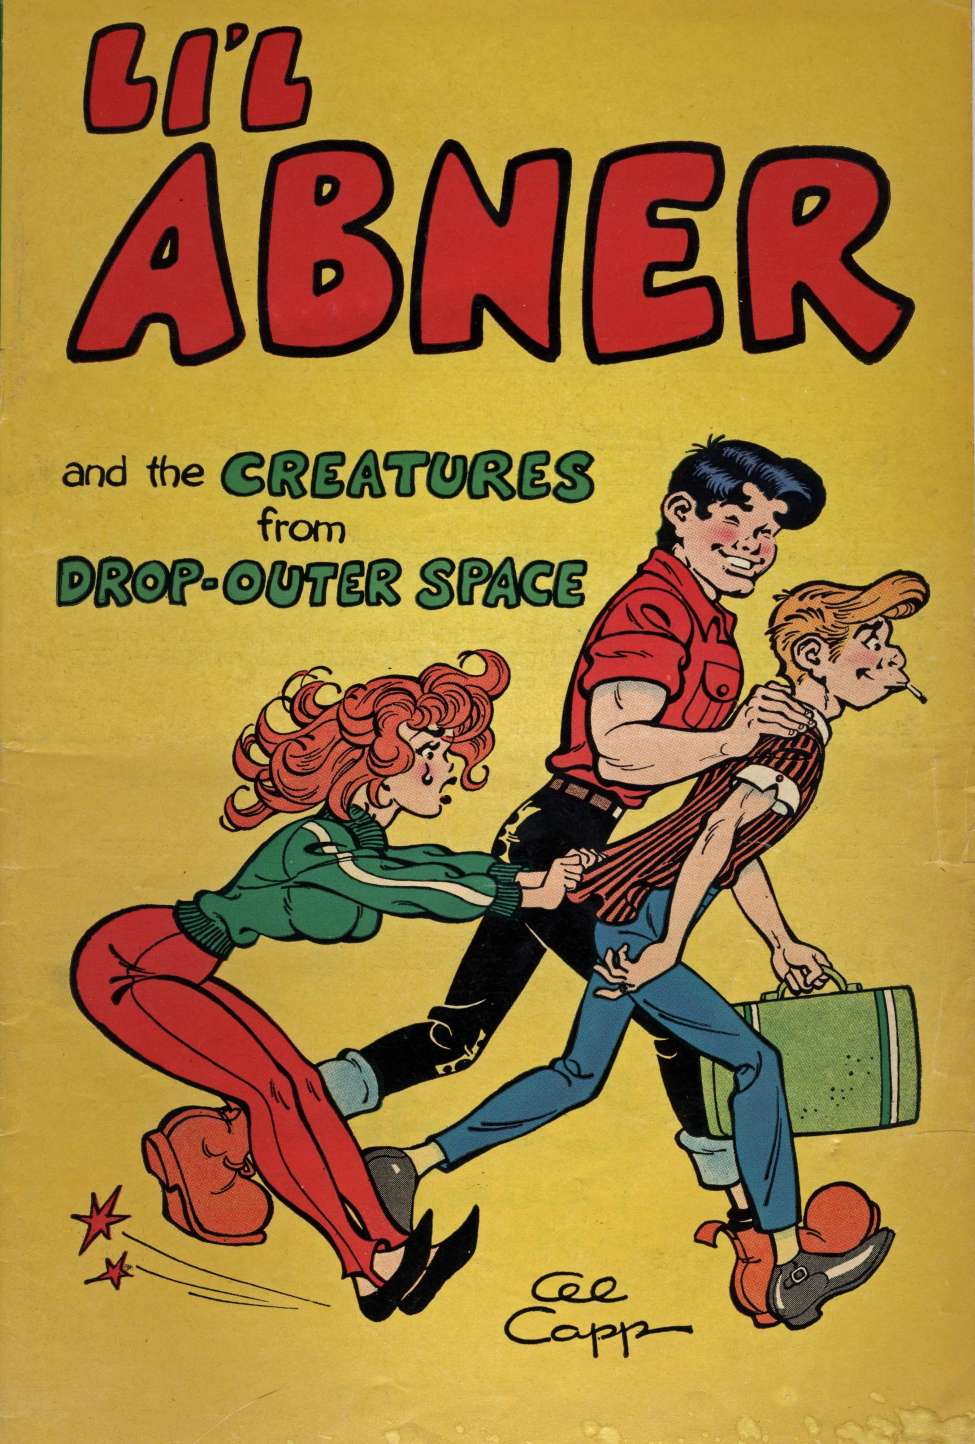 Book Cover For Li'l Abner and the Creatures from Drop-Outer Space